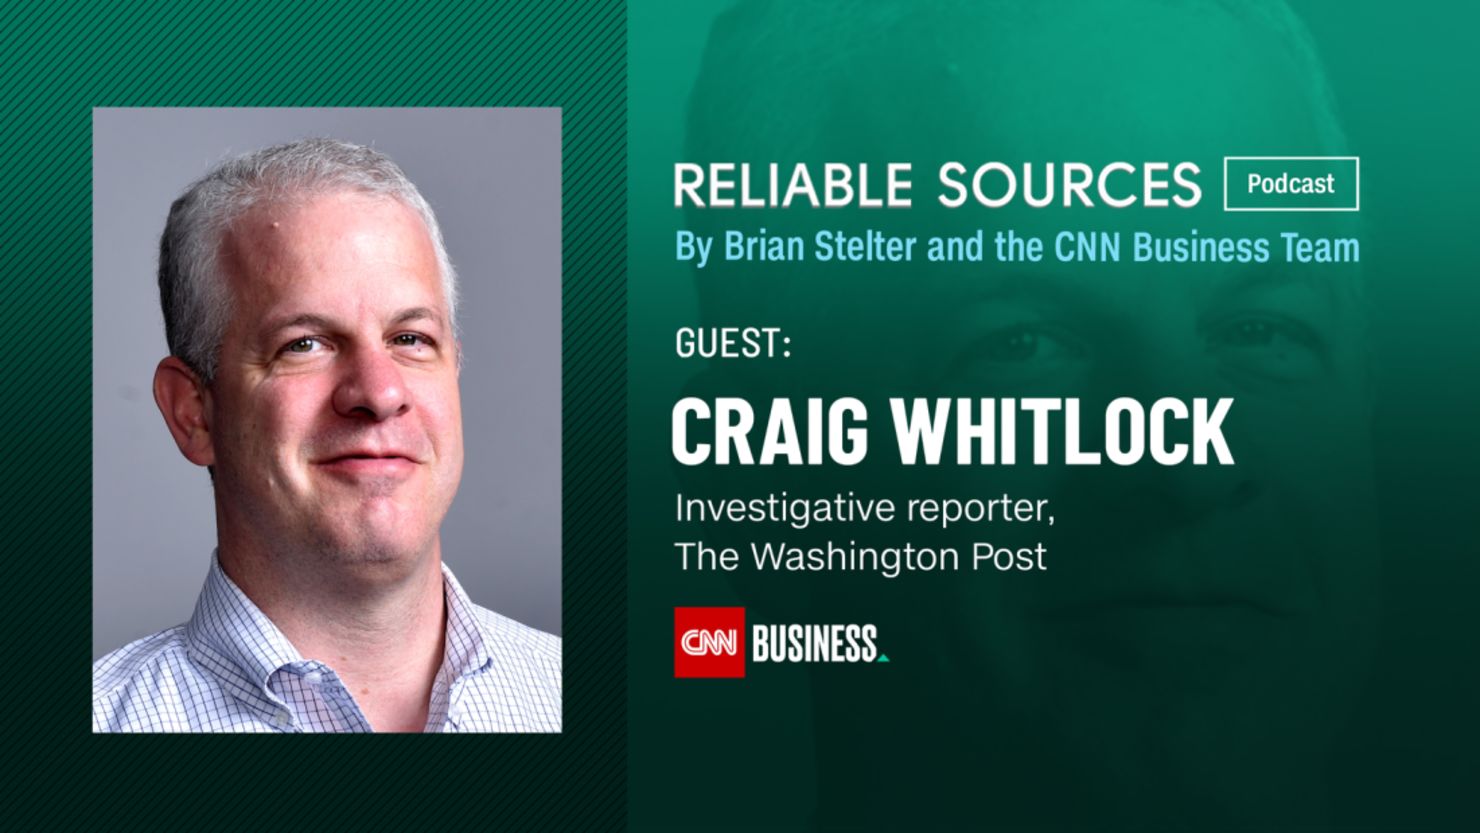 20191213-reliable-sources-podcast-Craig_Whitlock